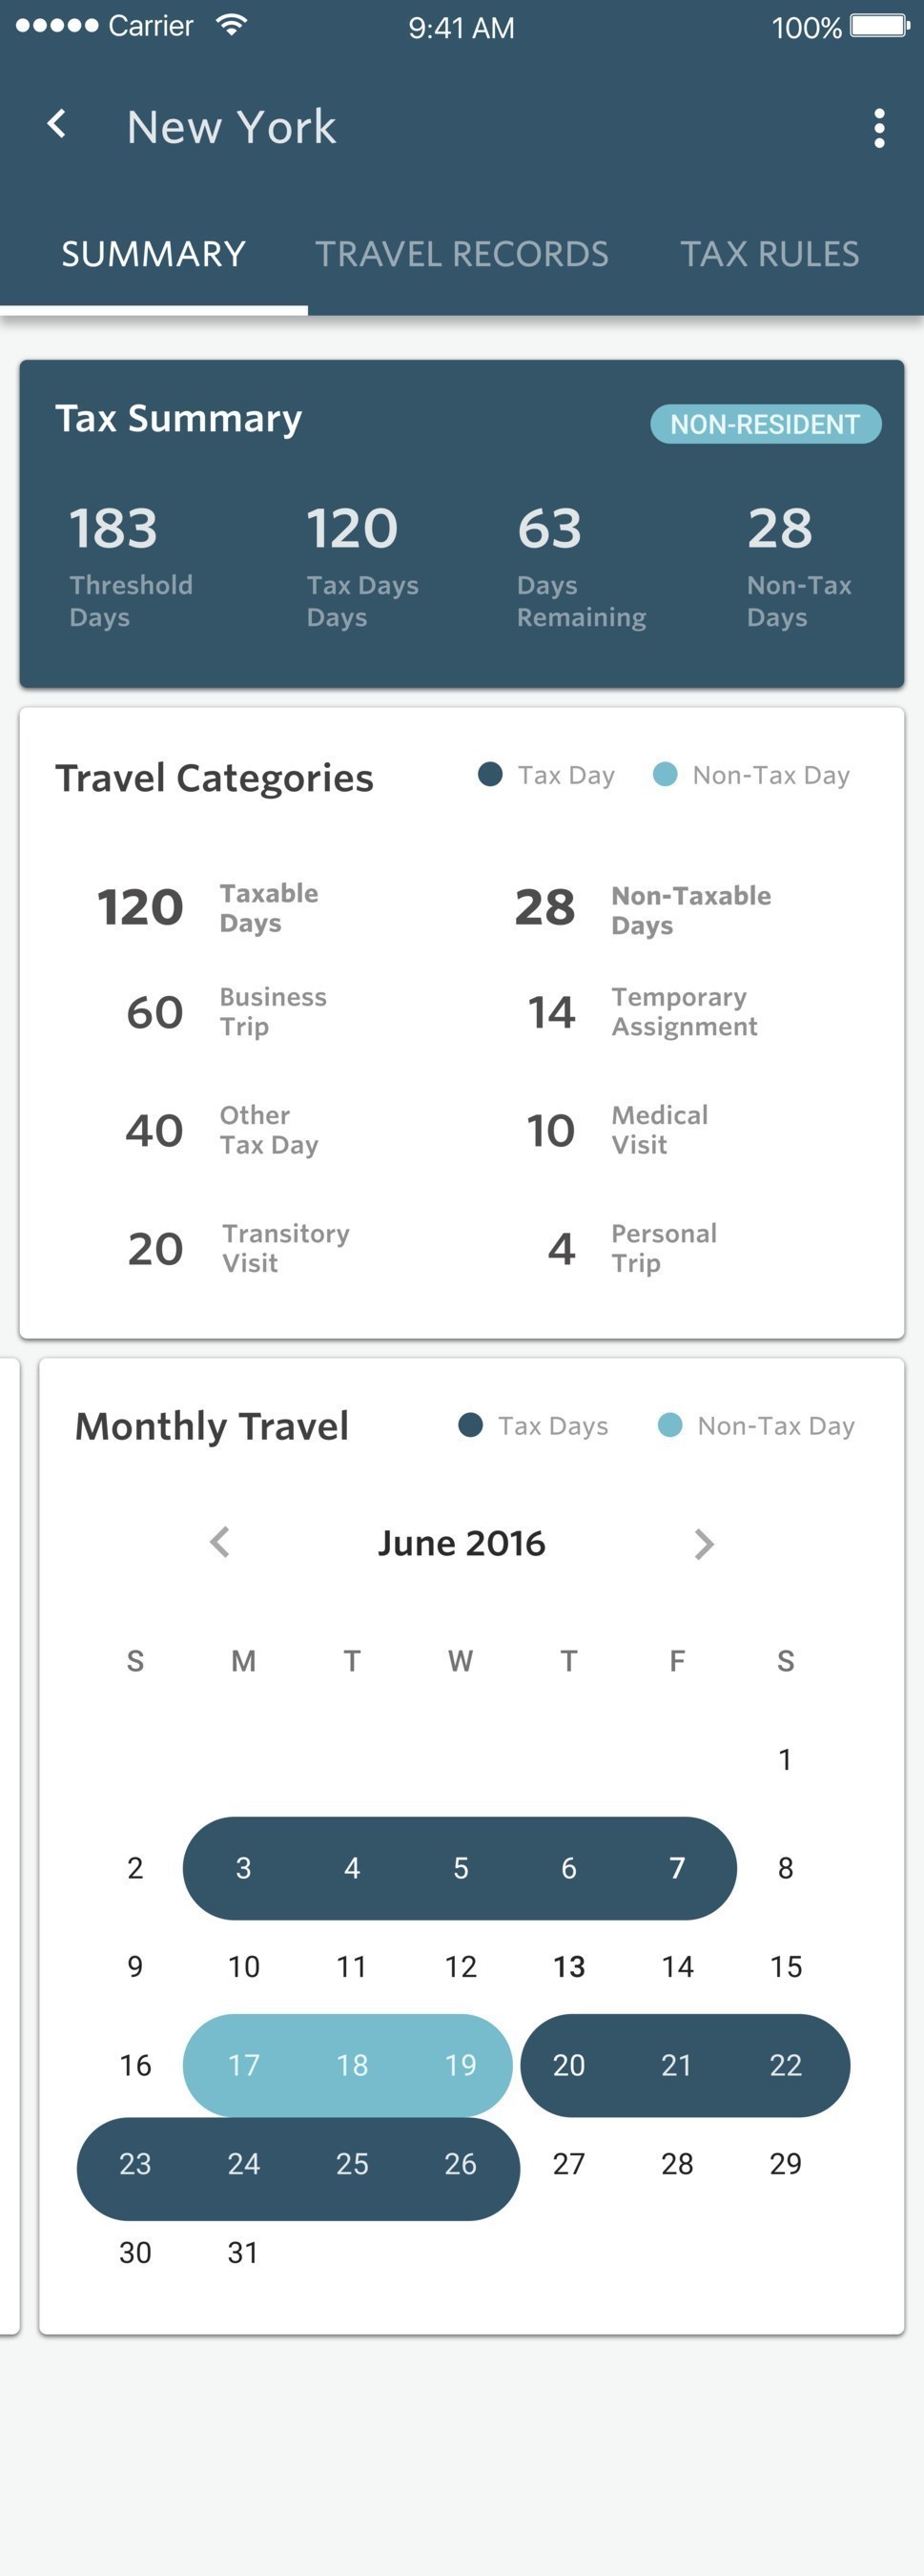 Since States treat certain visits differently in determining taxable travel, TaxDay provides a summary of how each trip is categorized, along with a calendar depiction.